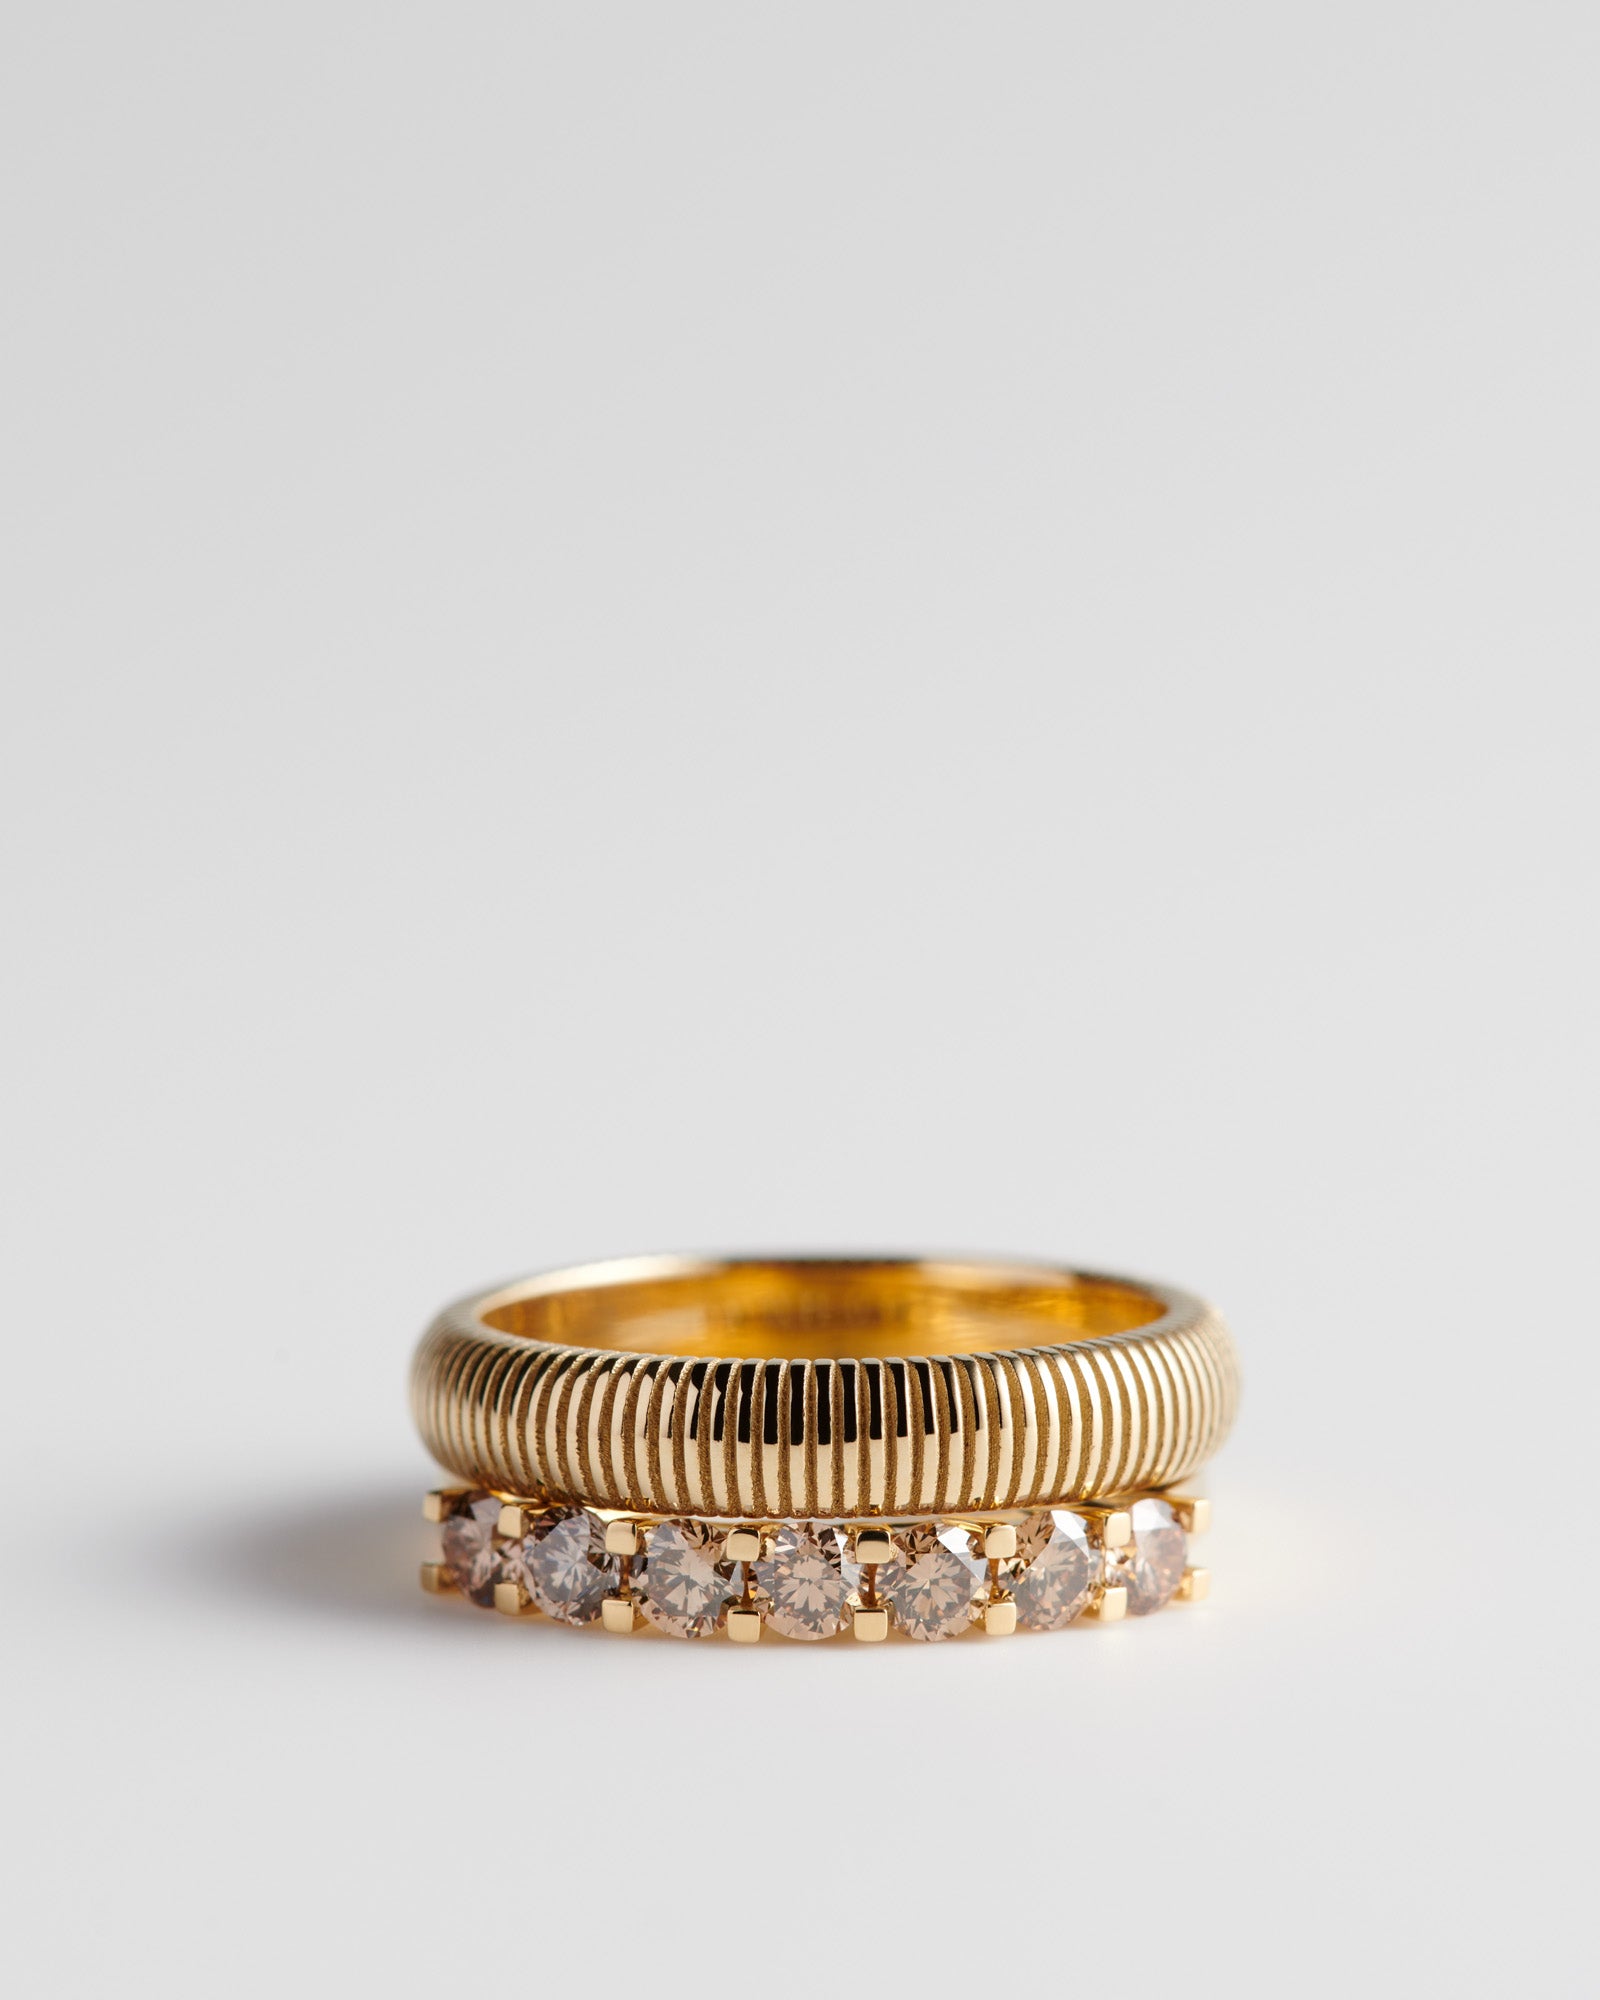 The Champagne Crest Ring